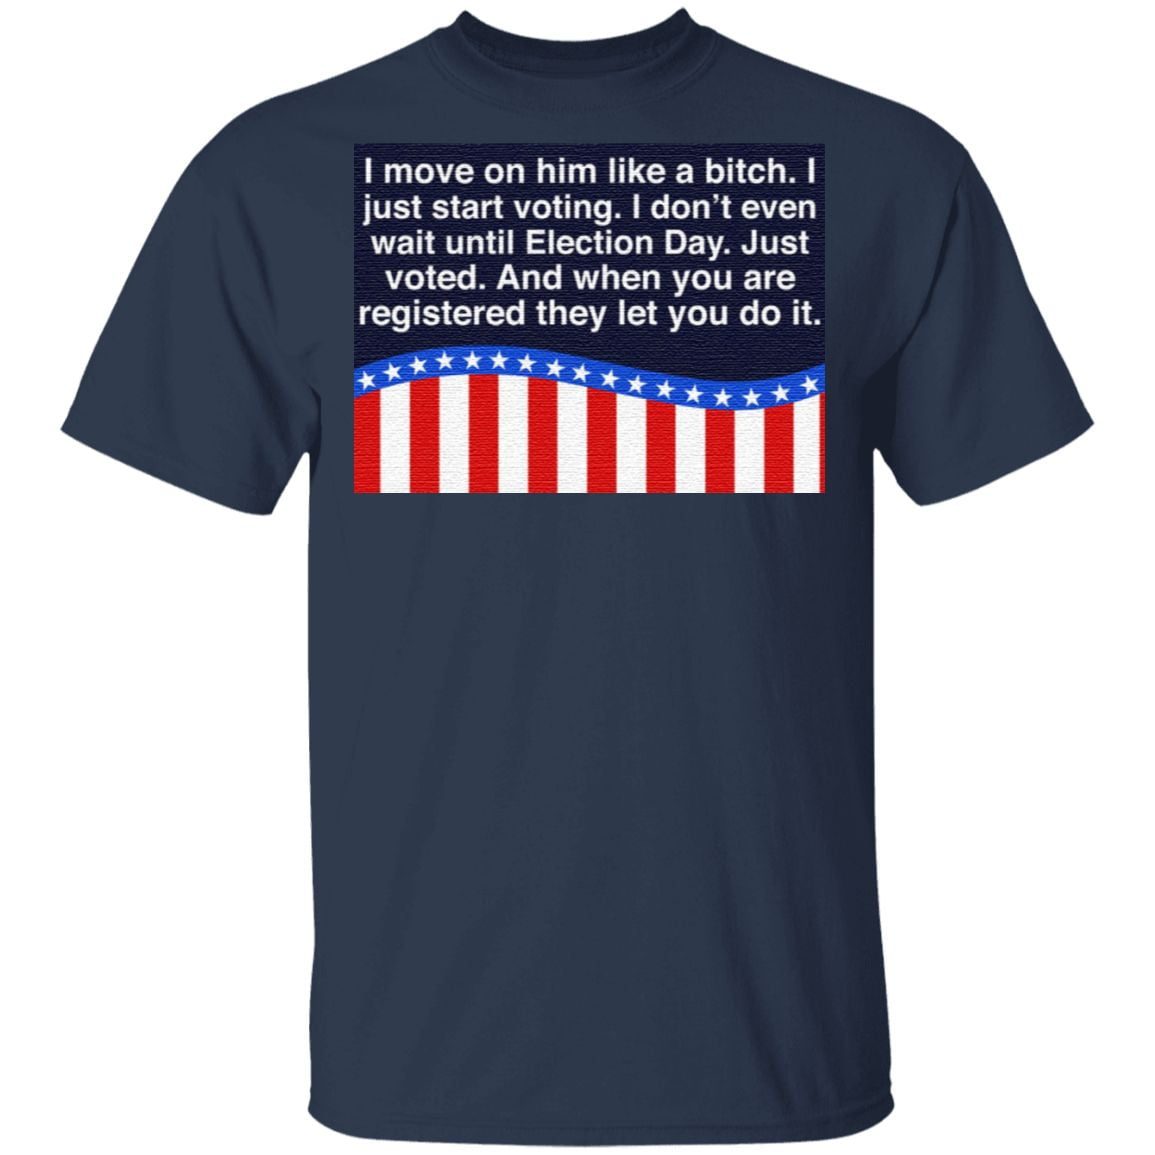 I Moved On Him Like A Bitch I Just Start Voting I Don’t Even Wait Until Election Day T Shirt